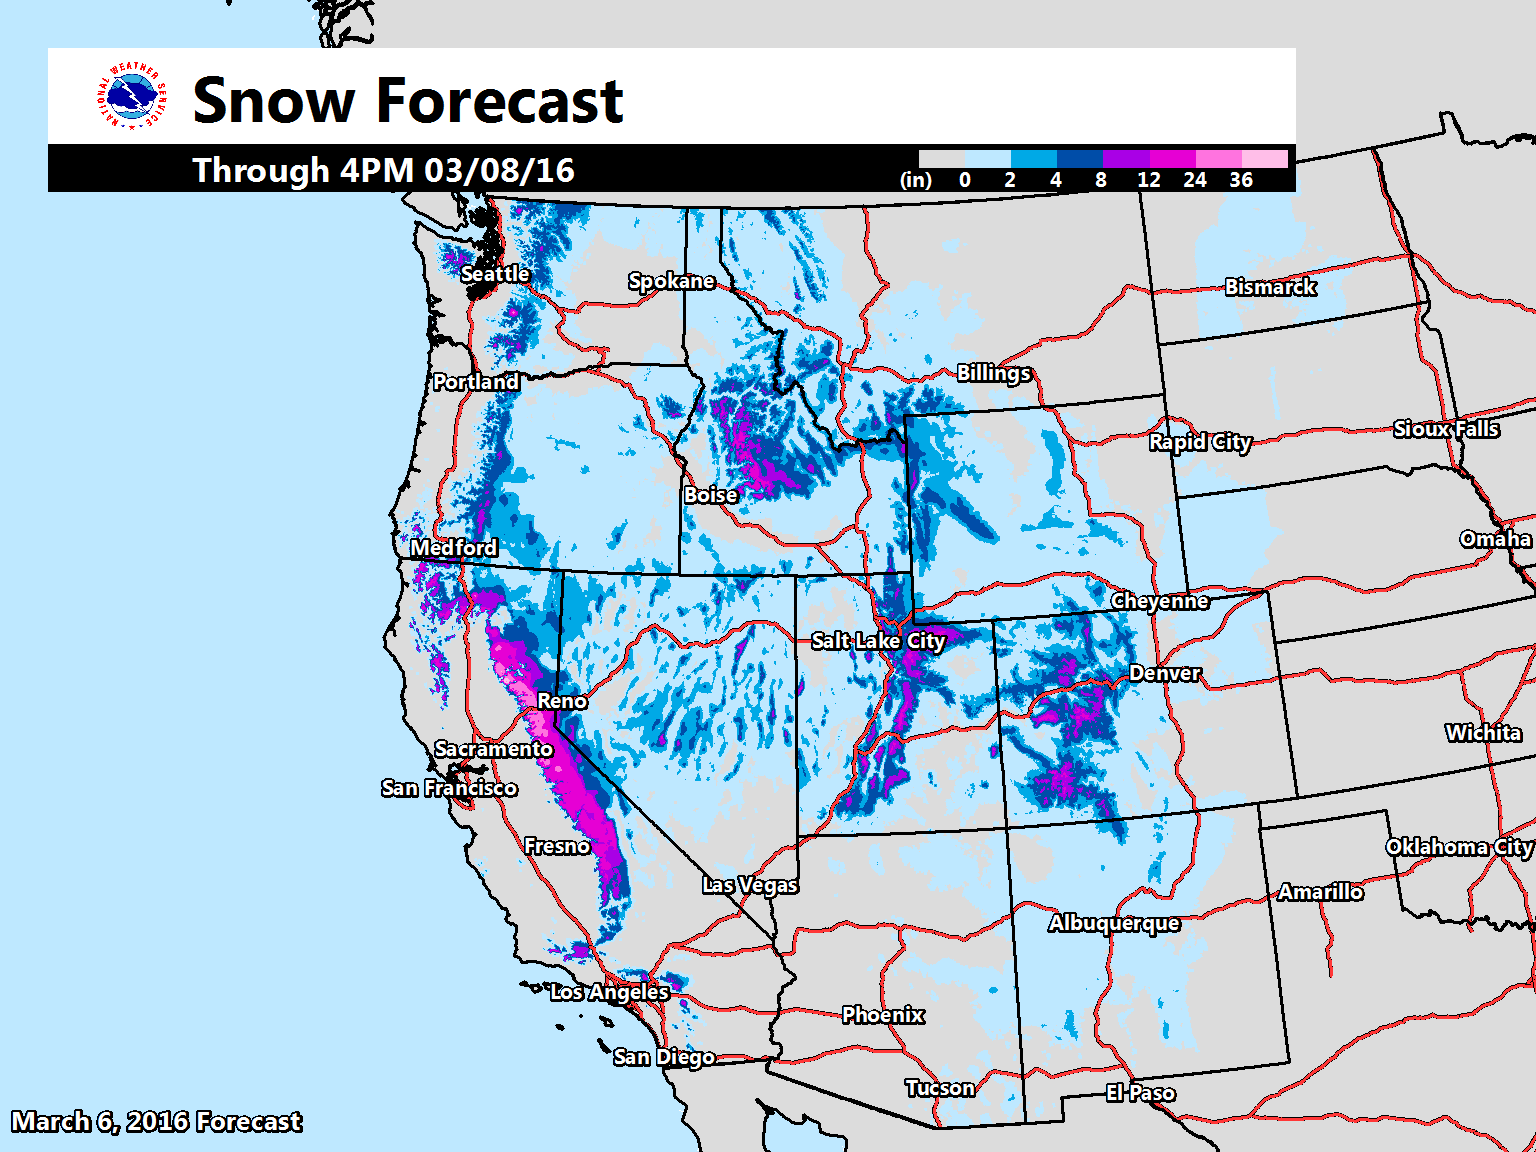 "Periods of heavy snow mountain snow over the next several days across portions of the western U.S. Use caution if you will be traveling in these areas!" - NOAA, today